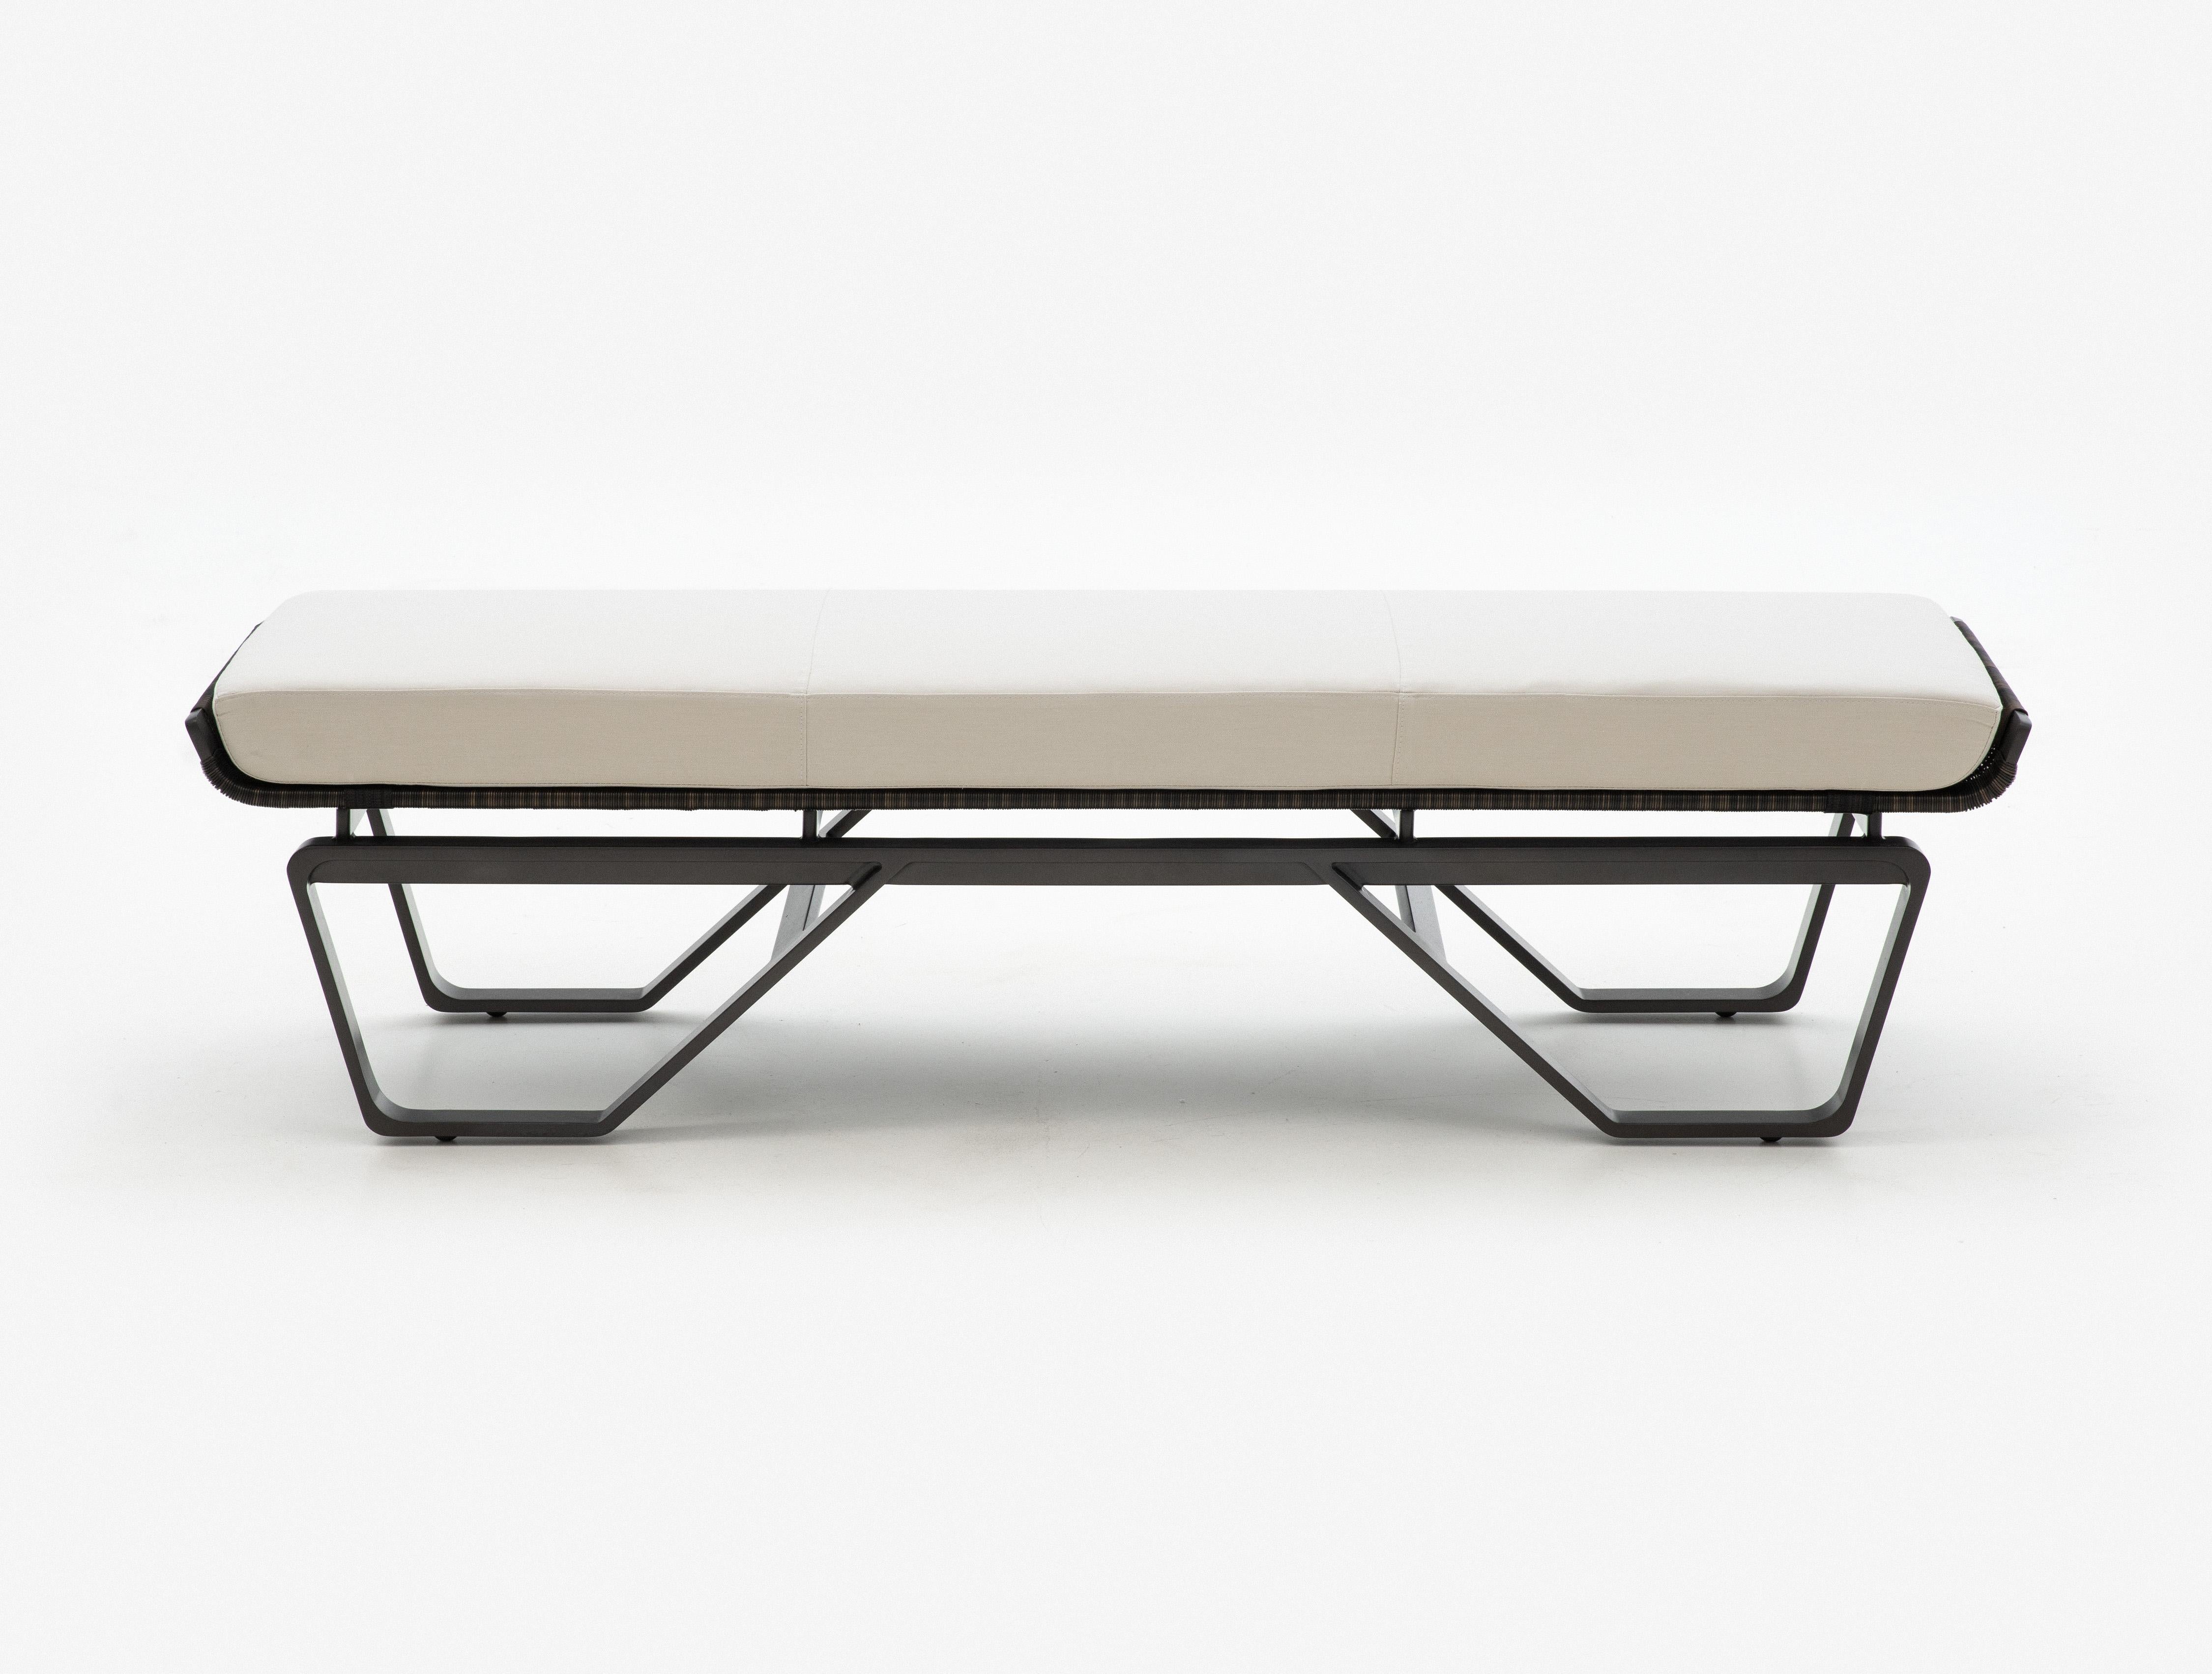 Drawing on the dynamic personality of our Meduse Table, the Meduse Bench adds new options for communal seating in an outdoor tableau. With a seat slightly higher than a typical bench, its dimensions make it ideal for placement poolside or around a